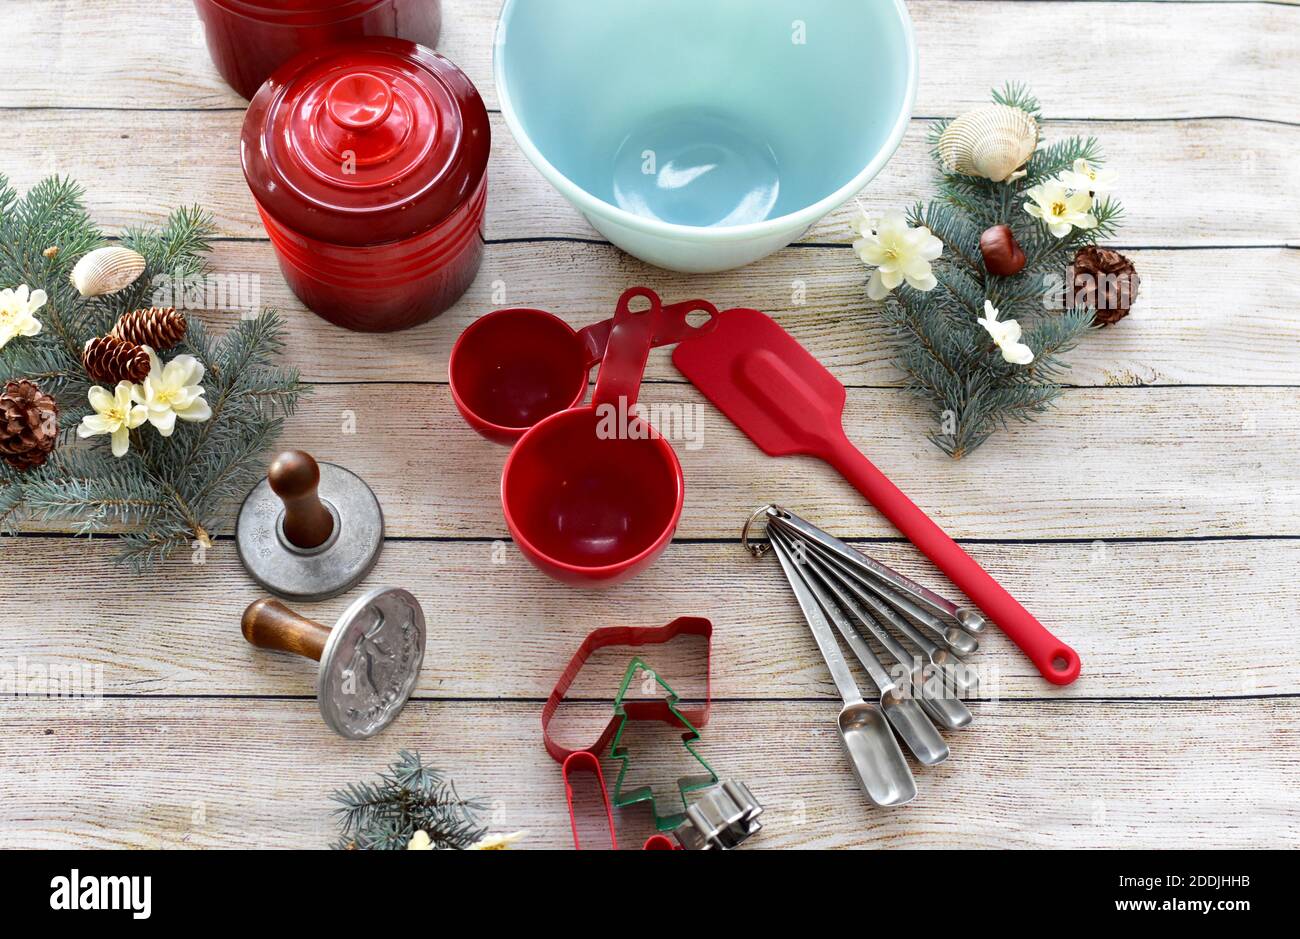 https://c8.alamy.com/comp/2DDJHHB/festive-holiday-seasonal-cookie-and-baking-equipment-and-supplies-to-make-delicious-gourmet-christmas-season-treats-and-gifts-for-friends-and-family-2DDJHHB.jpg